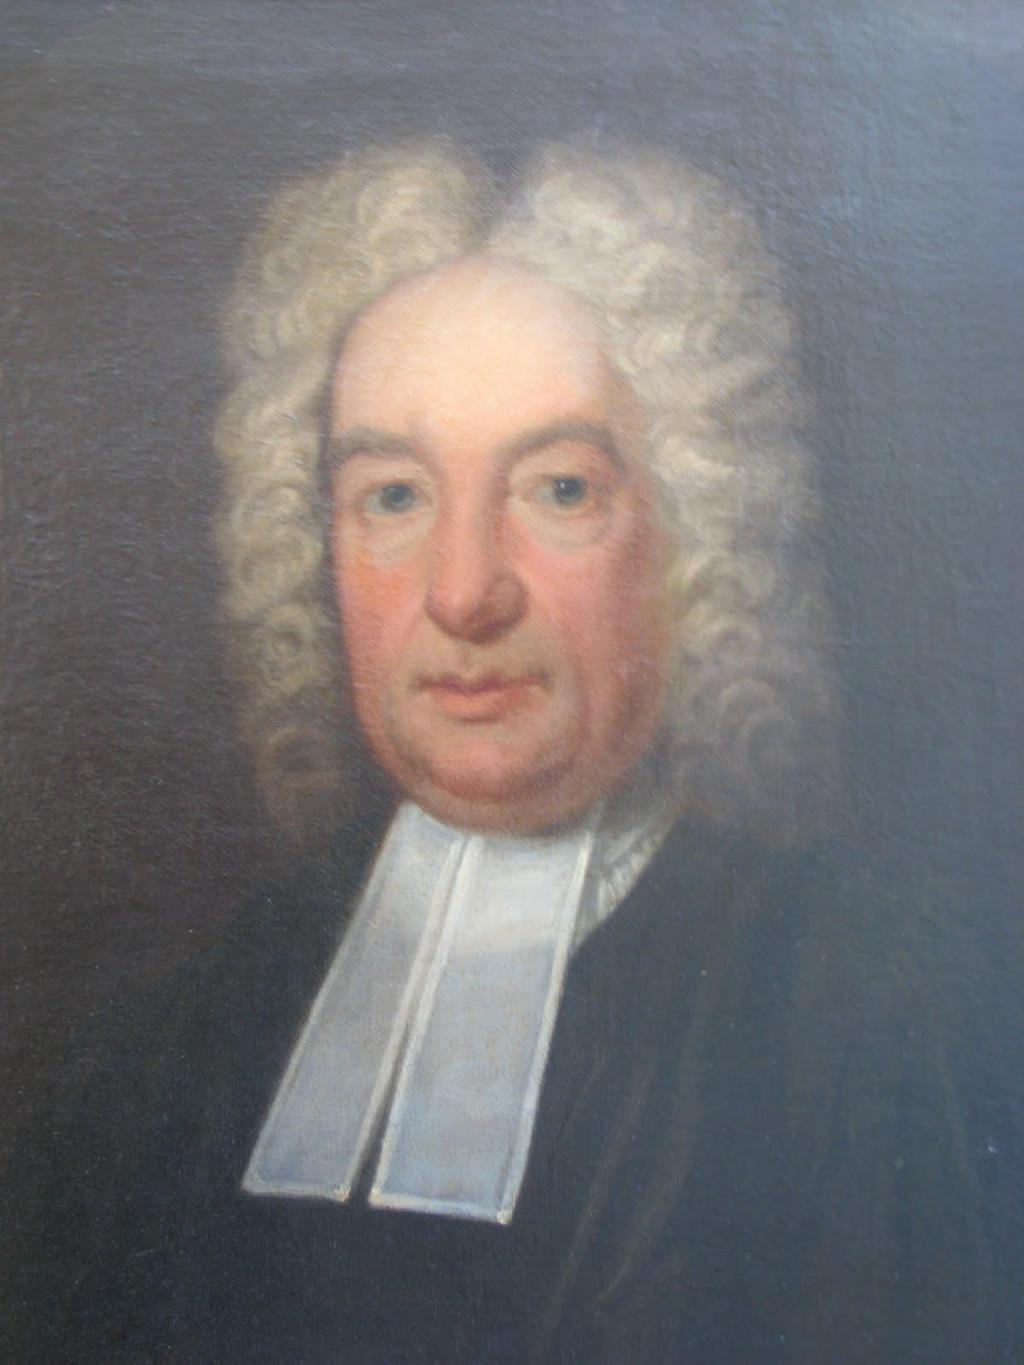 Who was Cotton Mather? Cotton Mather was born over 350 years ago, 40 years before Edwards. He died the same month of his birth, 65 years later, on February 13, 1728.